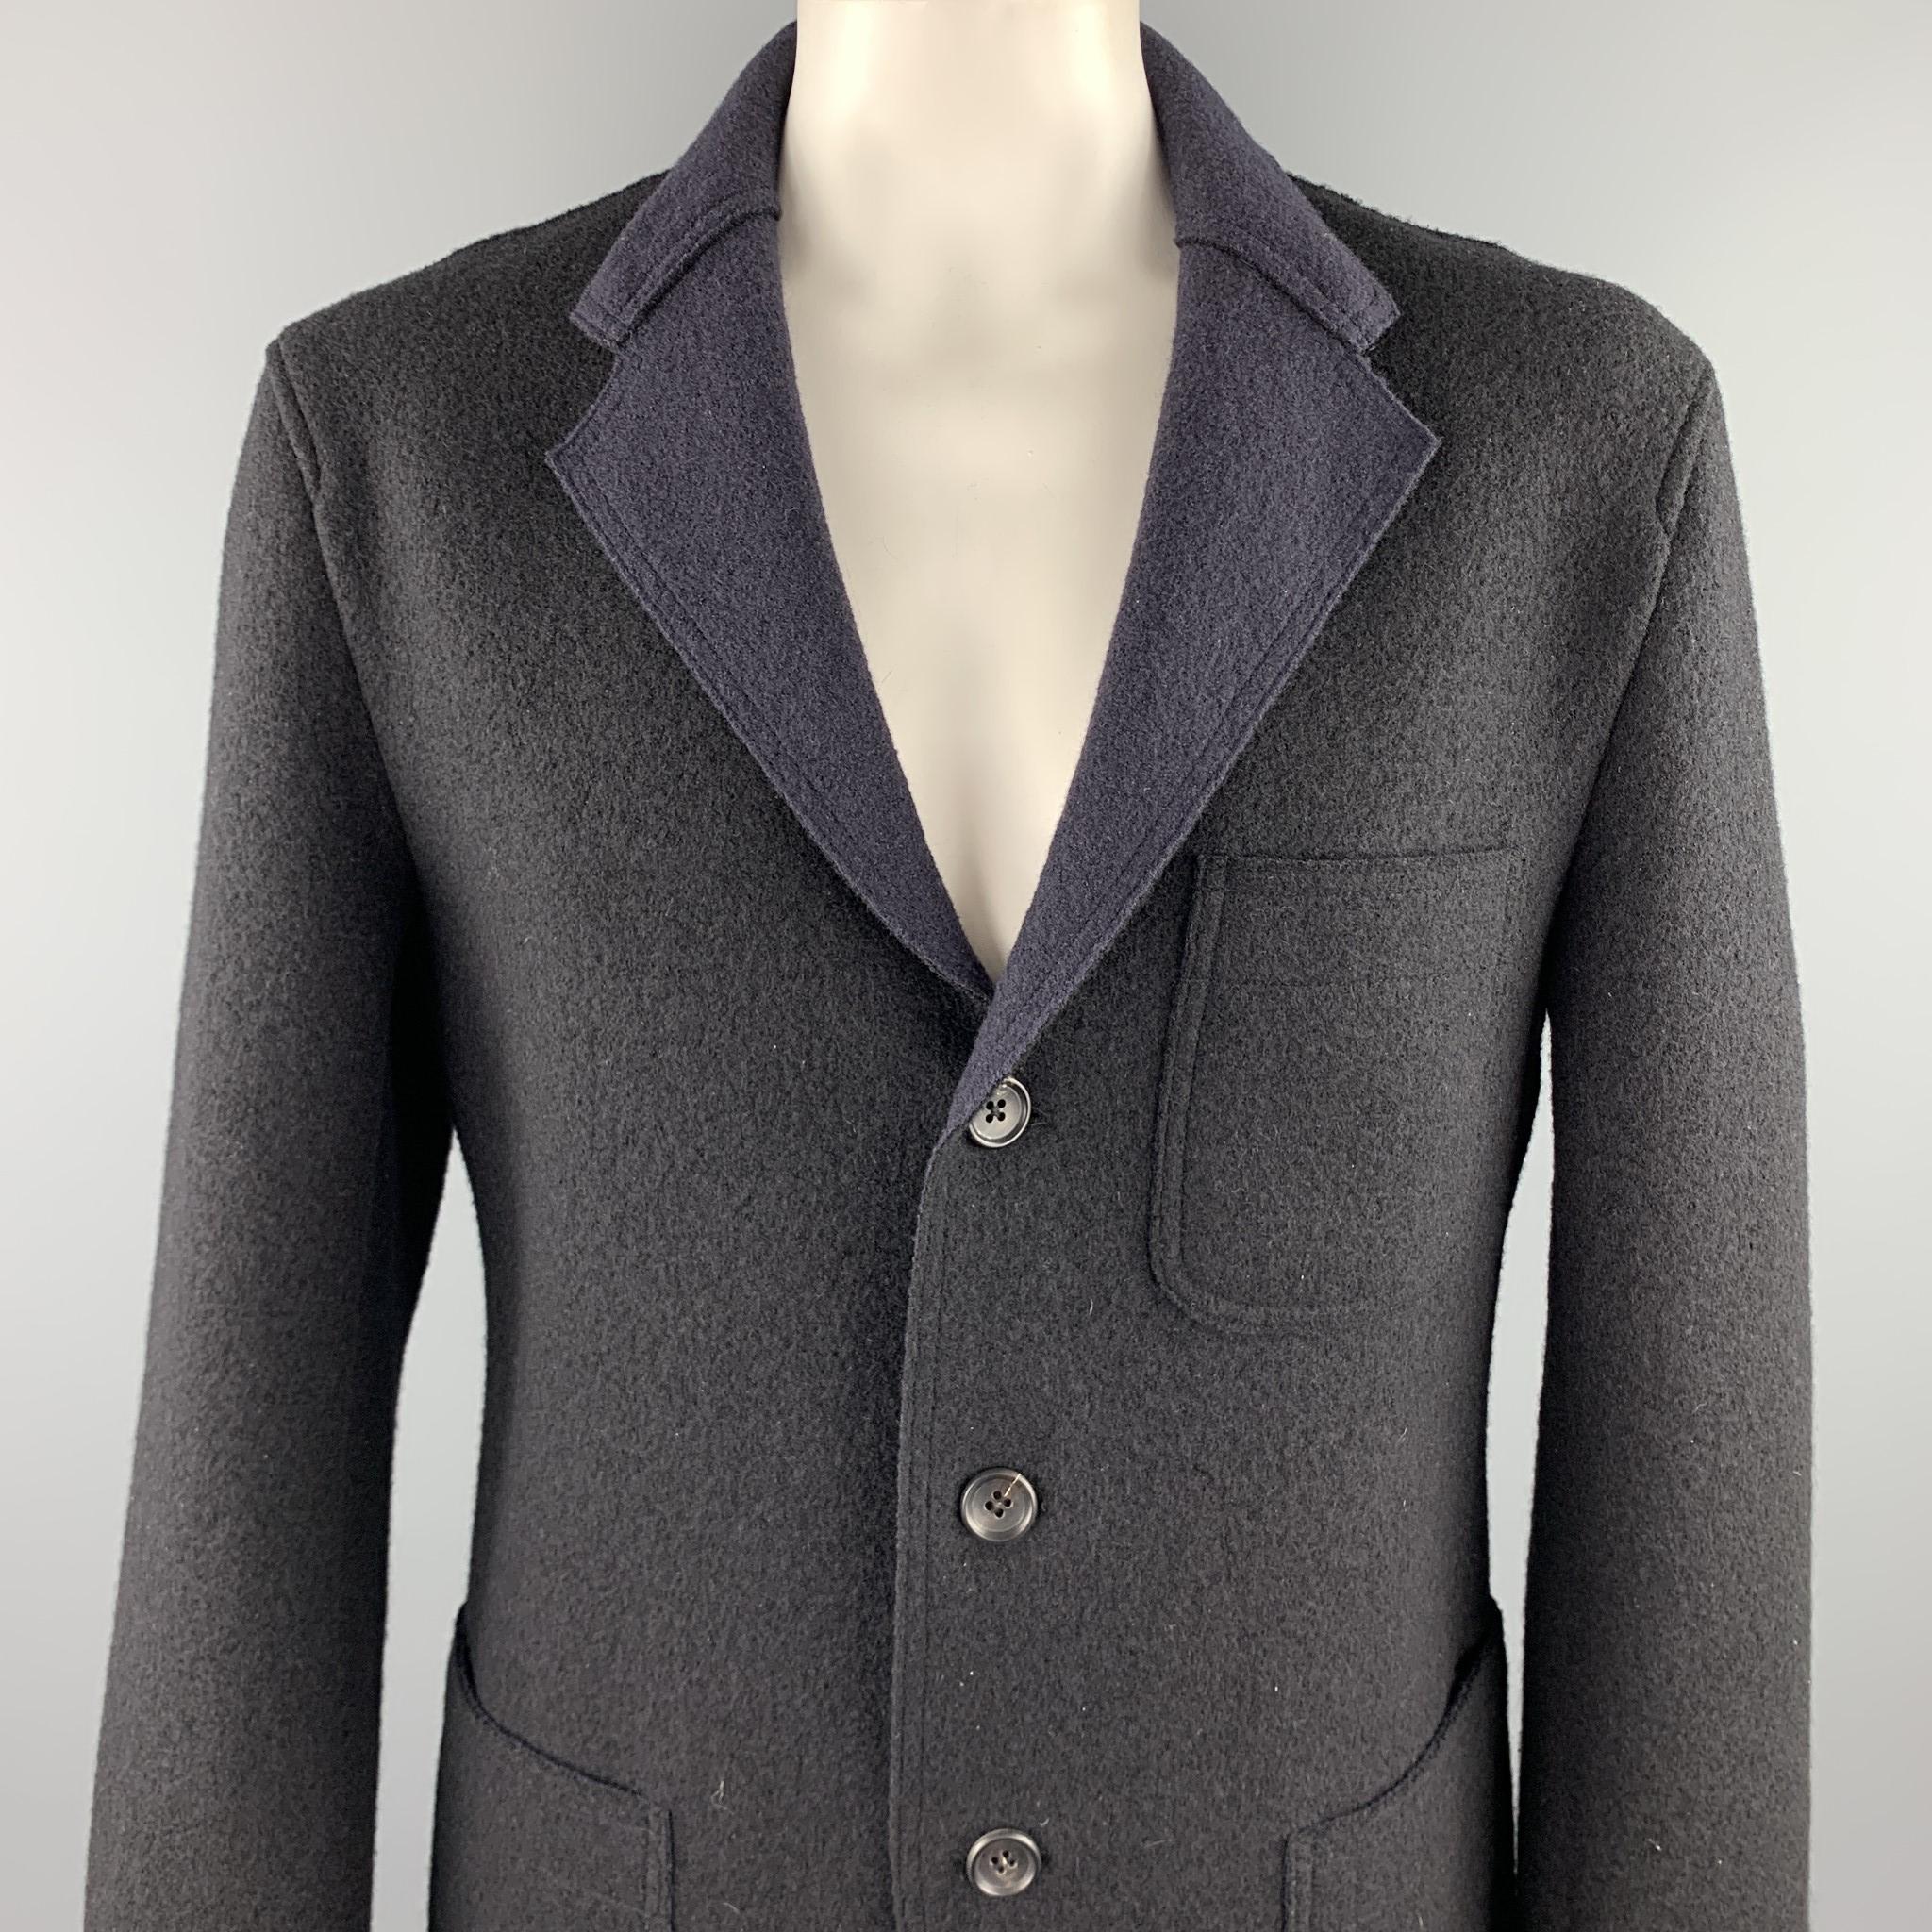 ISSEY MIYAKE coat comes in a navy textured wool featuring a notch lapel, patch pockets, and a three button closure. Made in Japan.

Excellent Pre-Owned Condition.
Marked: No size marked

Measurements:

Shoulder: 20 in. 
Chest: 46 in. 
Sleeve: 27.5